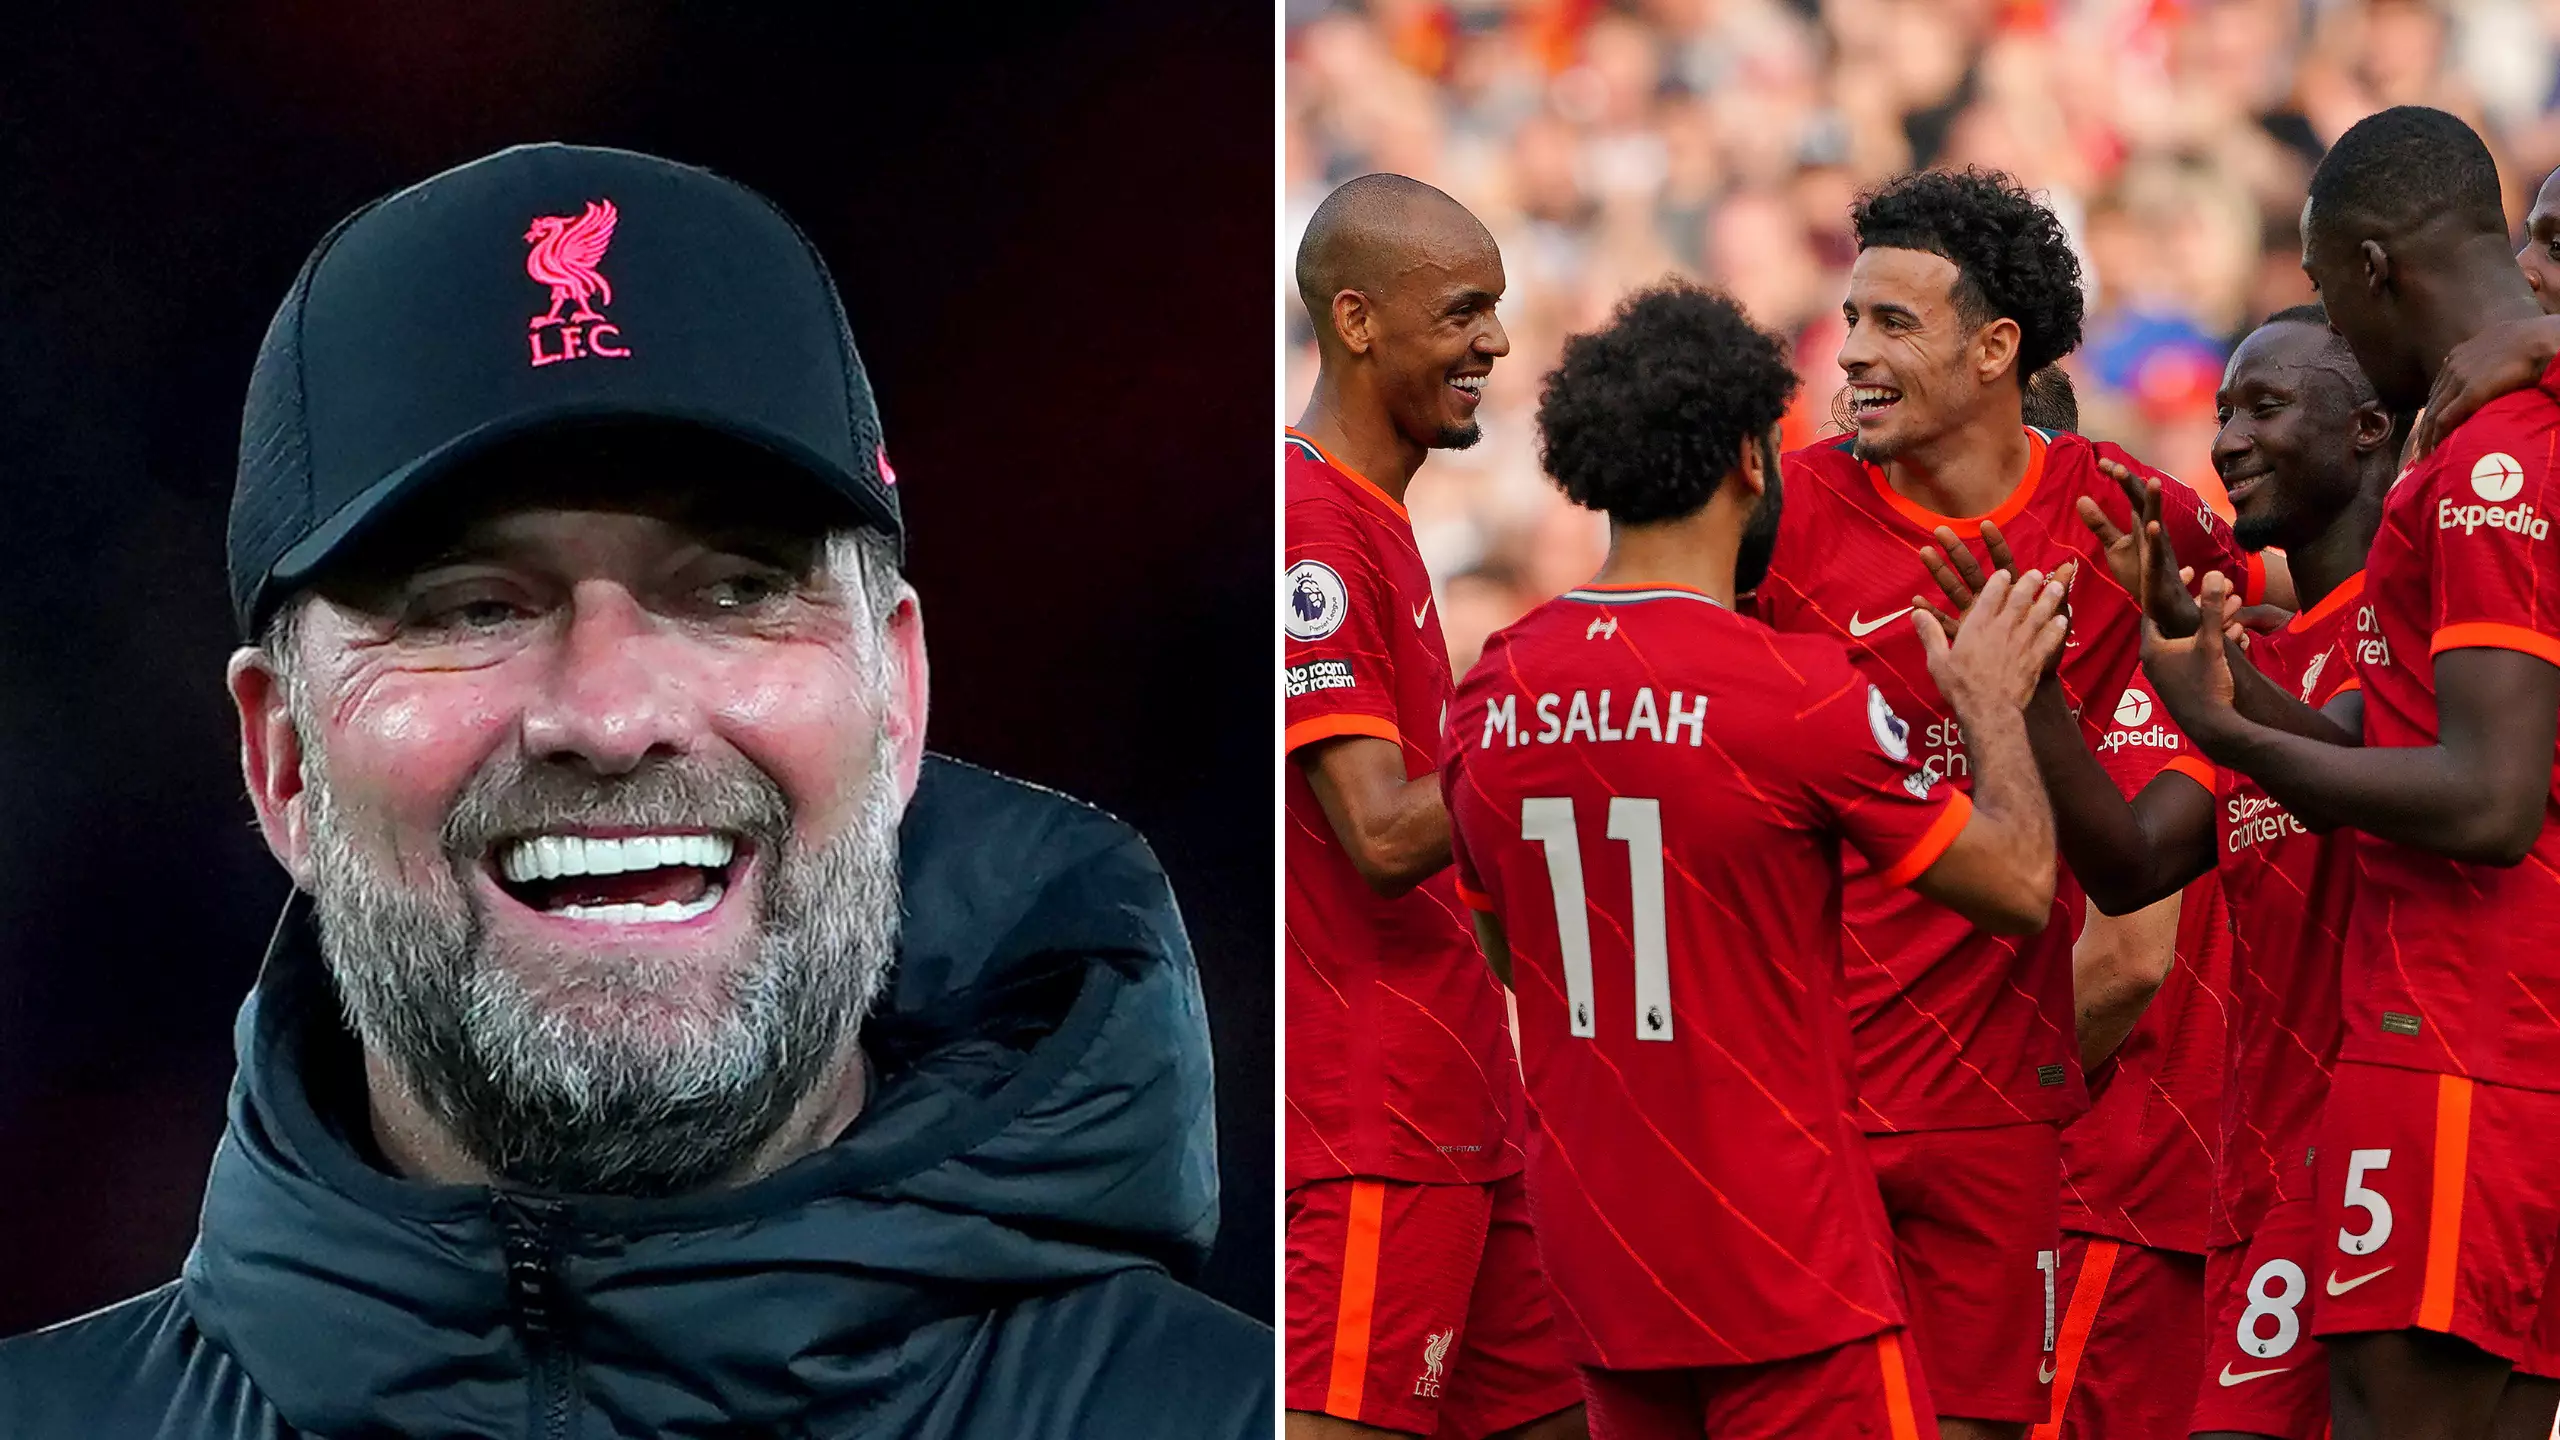 “You Can See Why He Failed At Liverpool” – Former Reds Player's Worrying Form Leads To Criticism